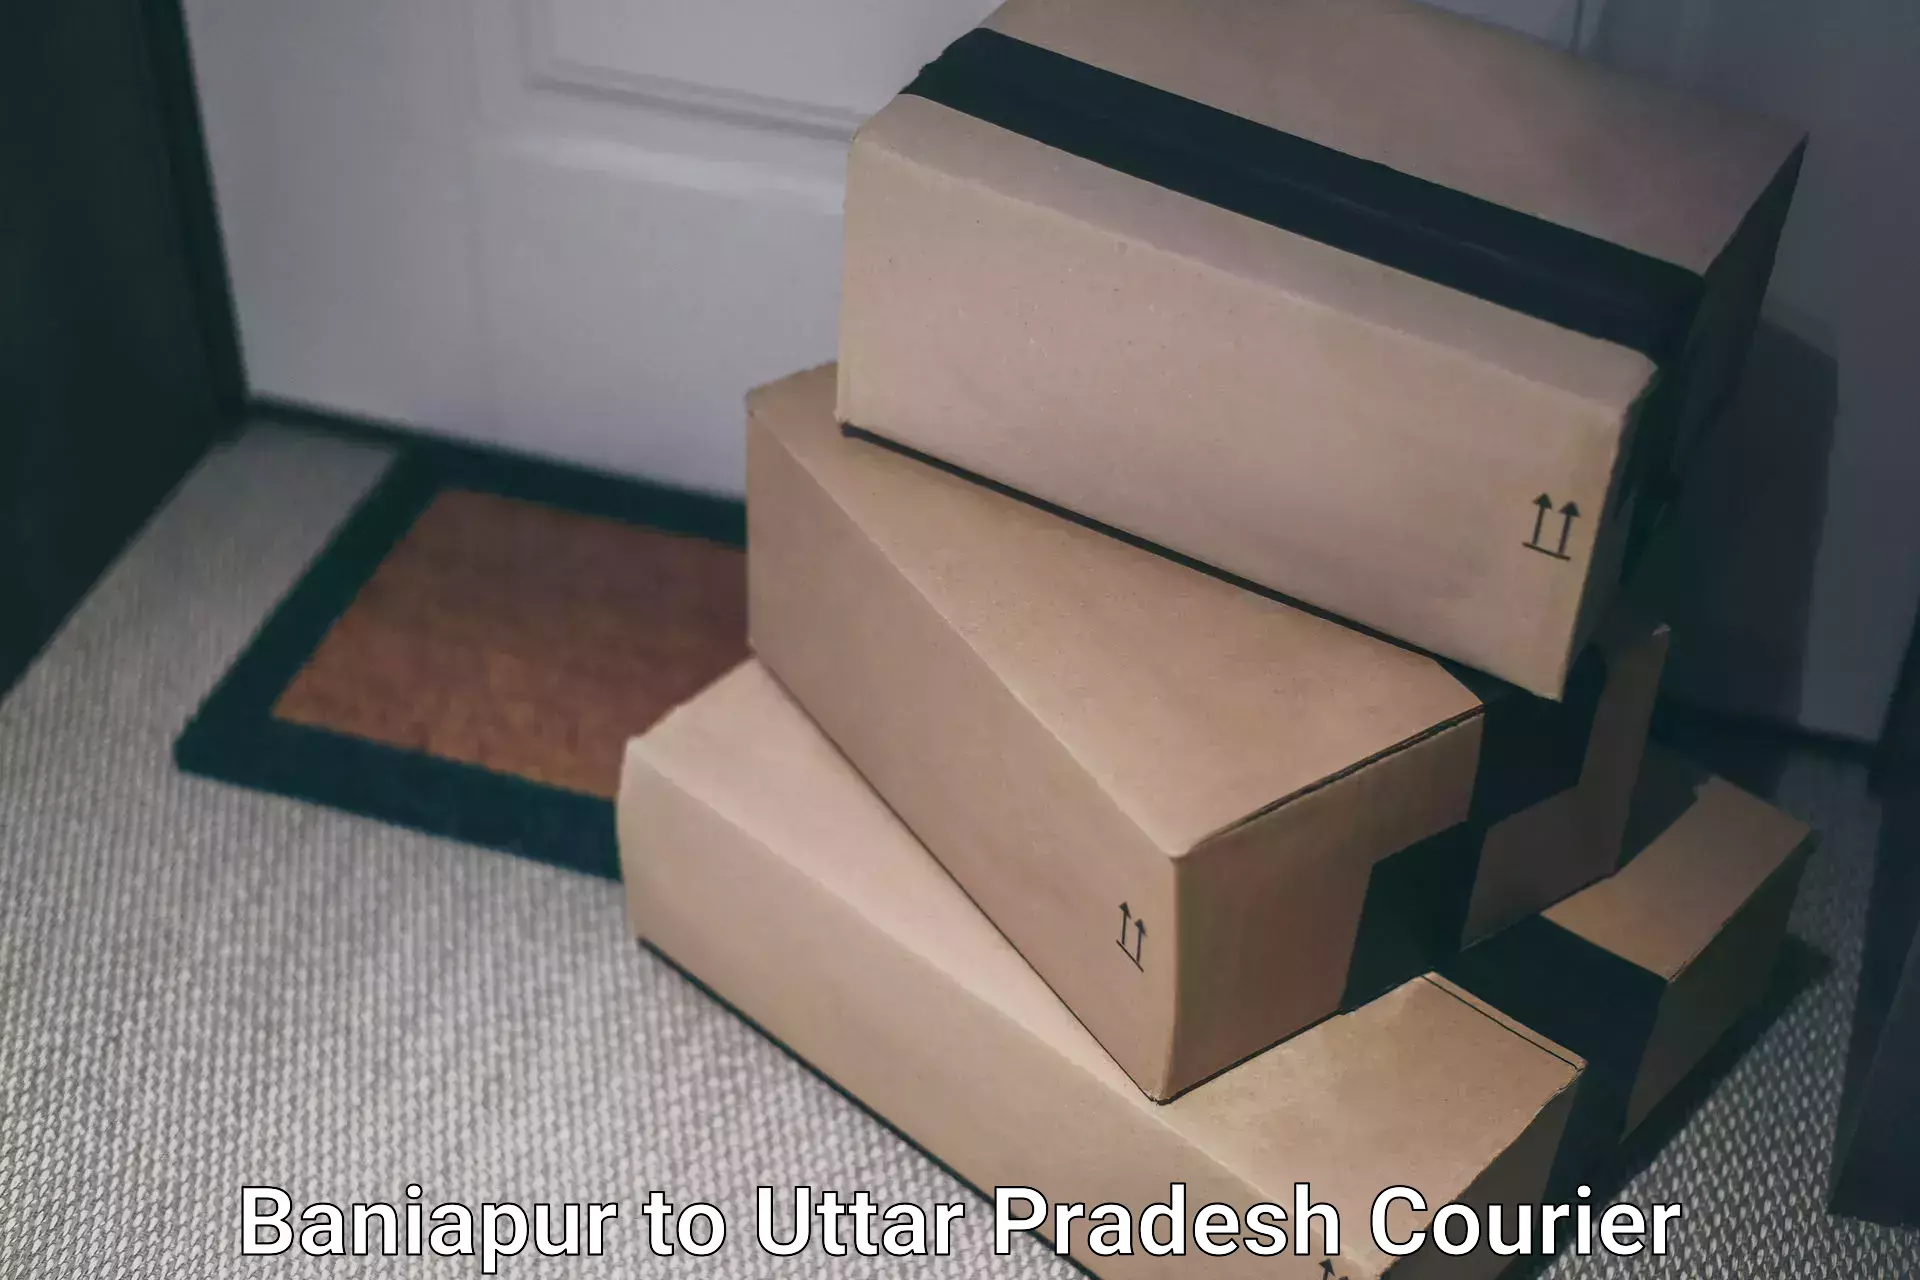 24/7 courier service in Baniapur to Vrindavan